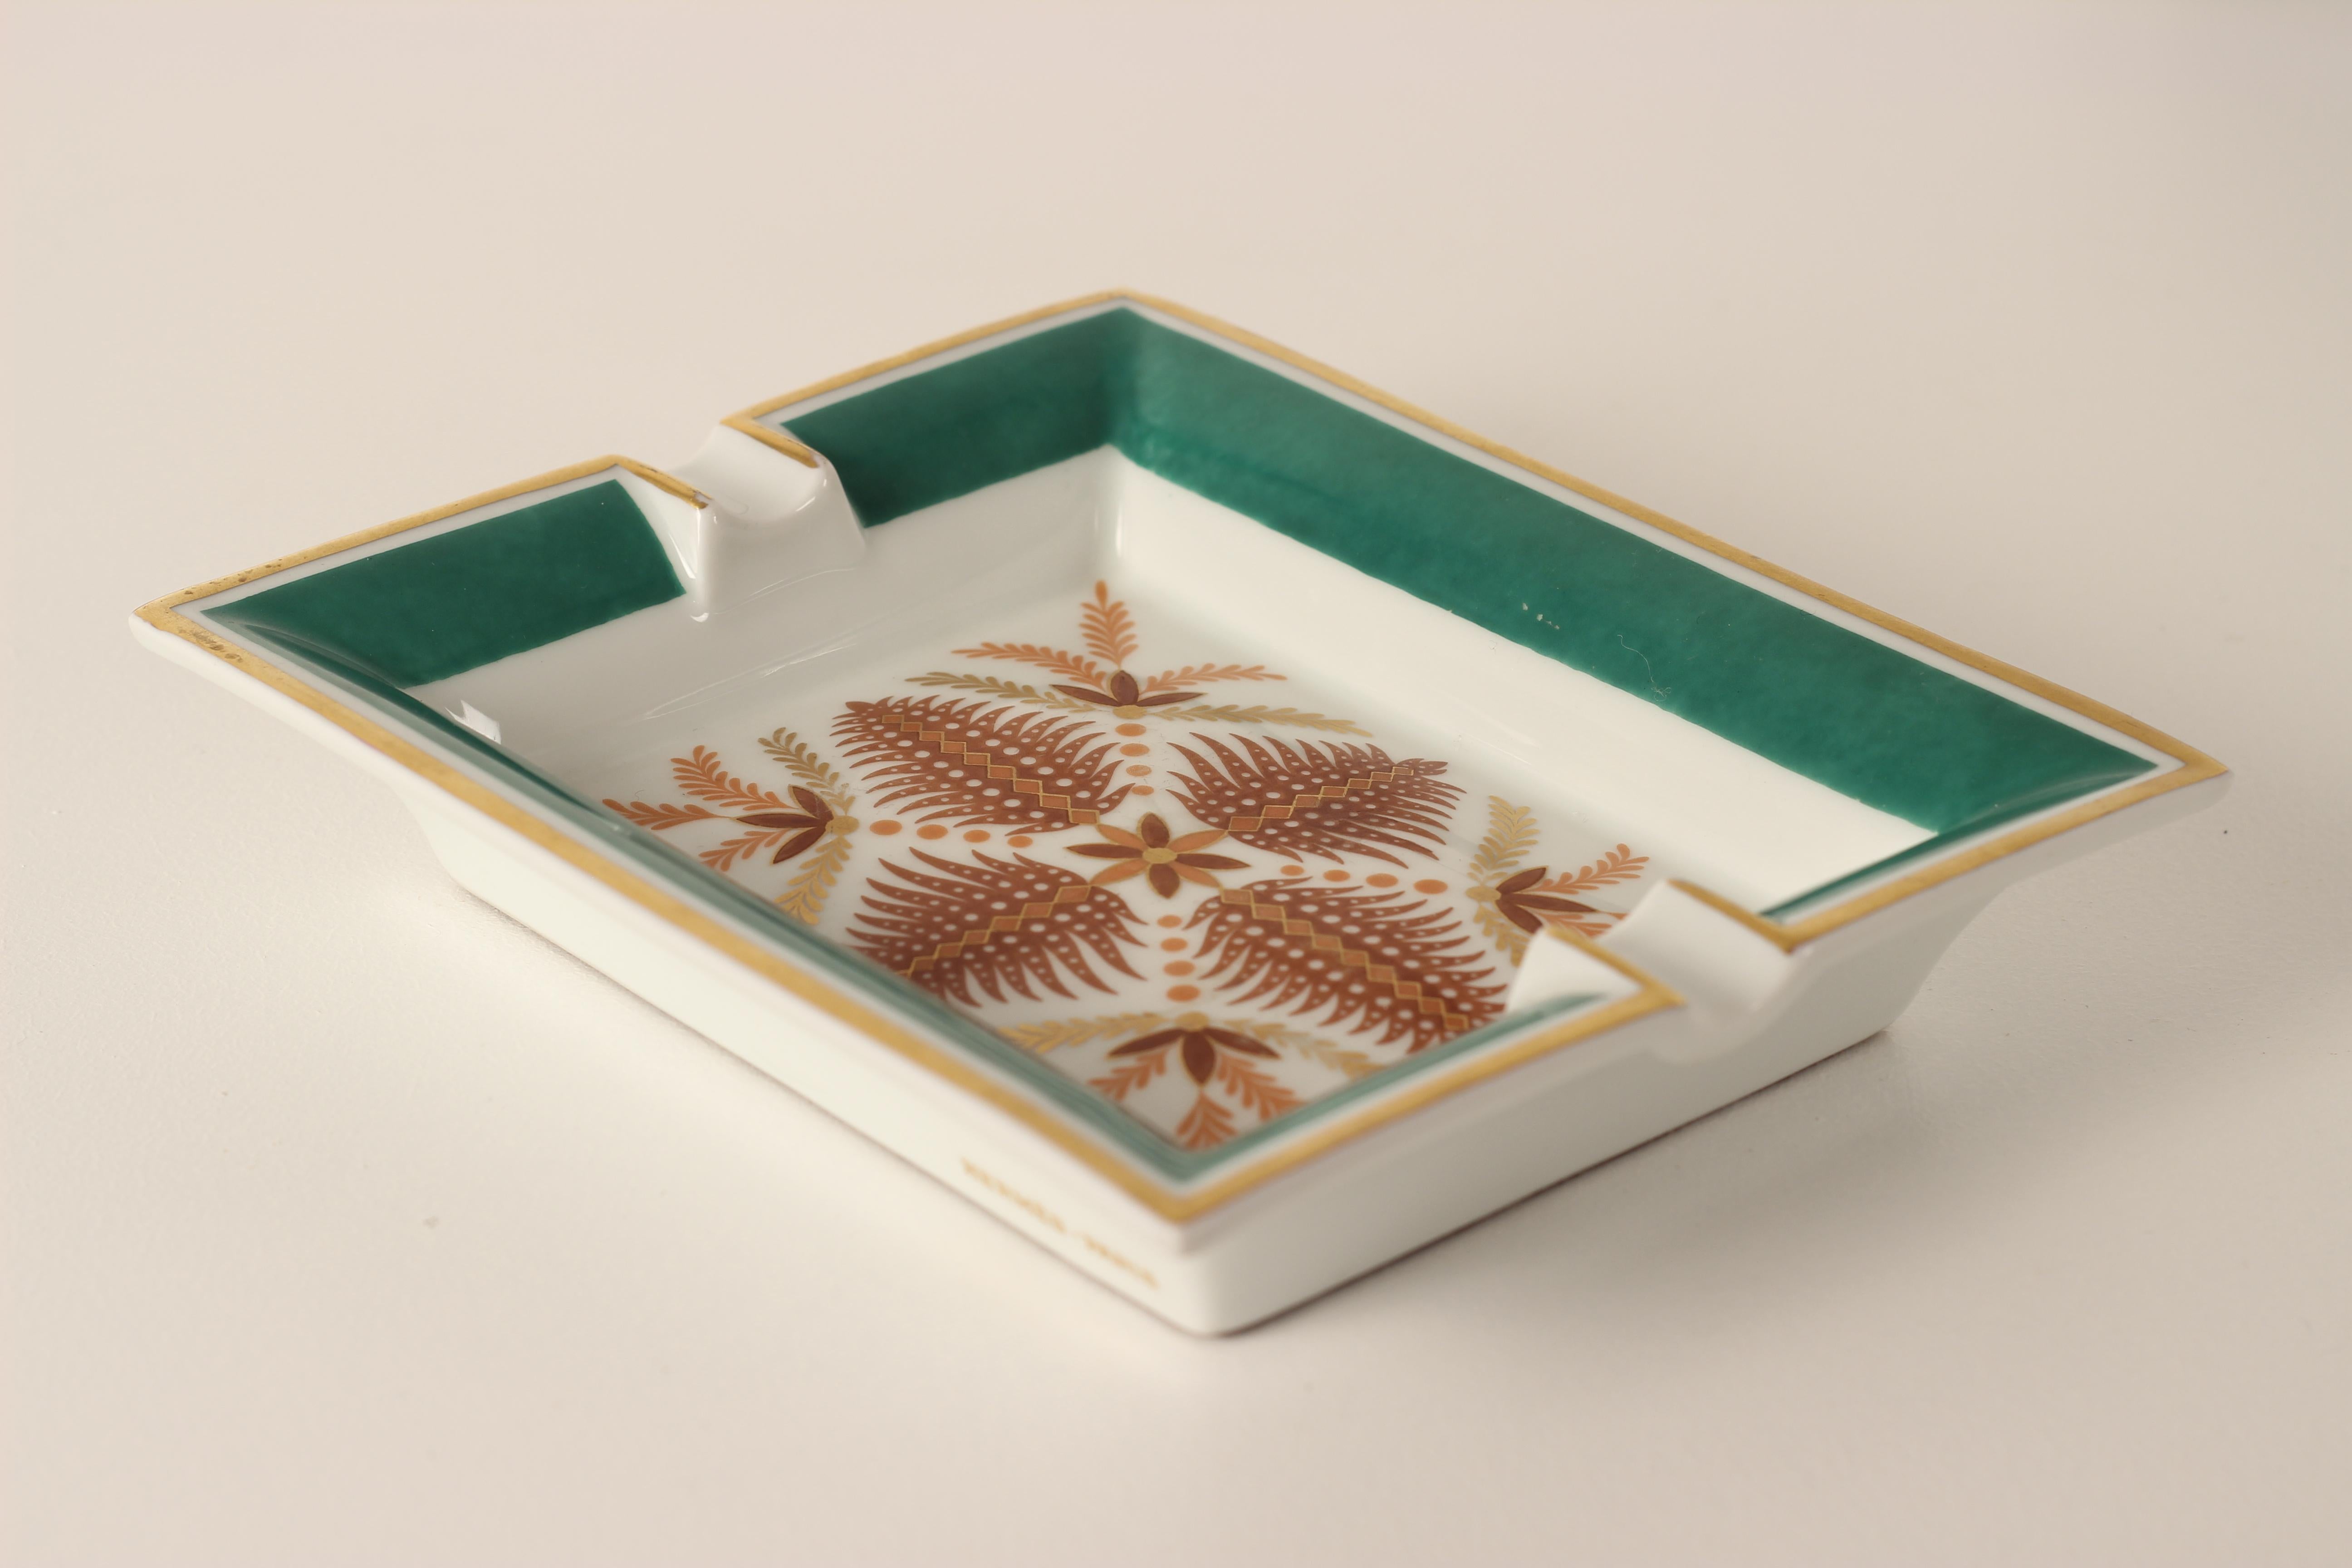 Porcelain Hermes Ashtray or Vide-Poche Catchall in the Neoclassical Botanical Style